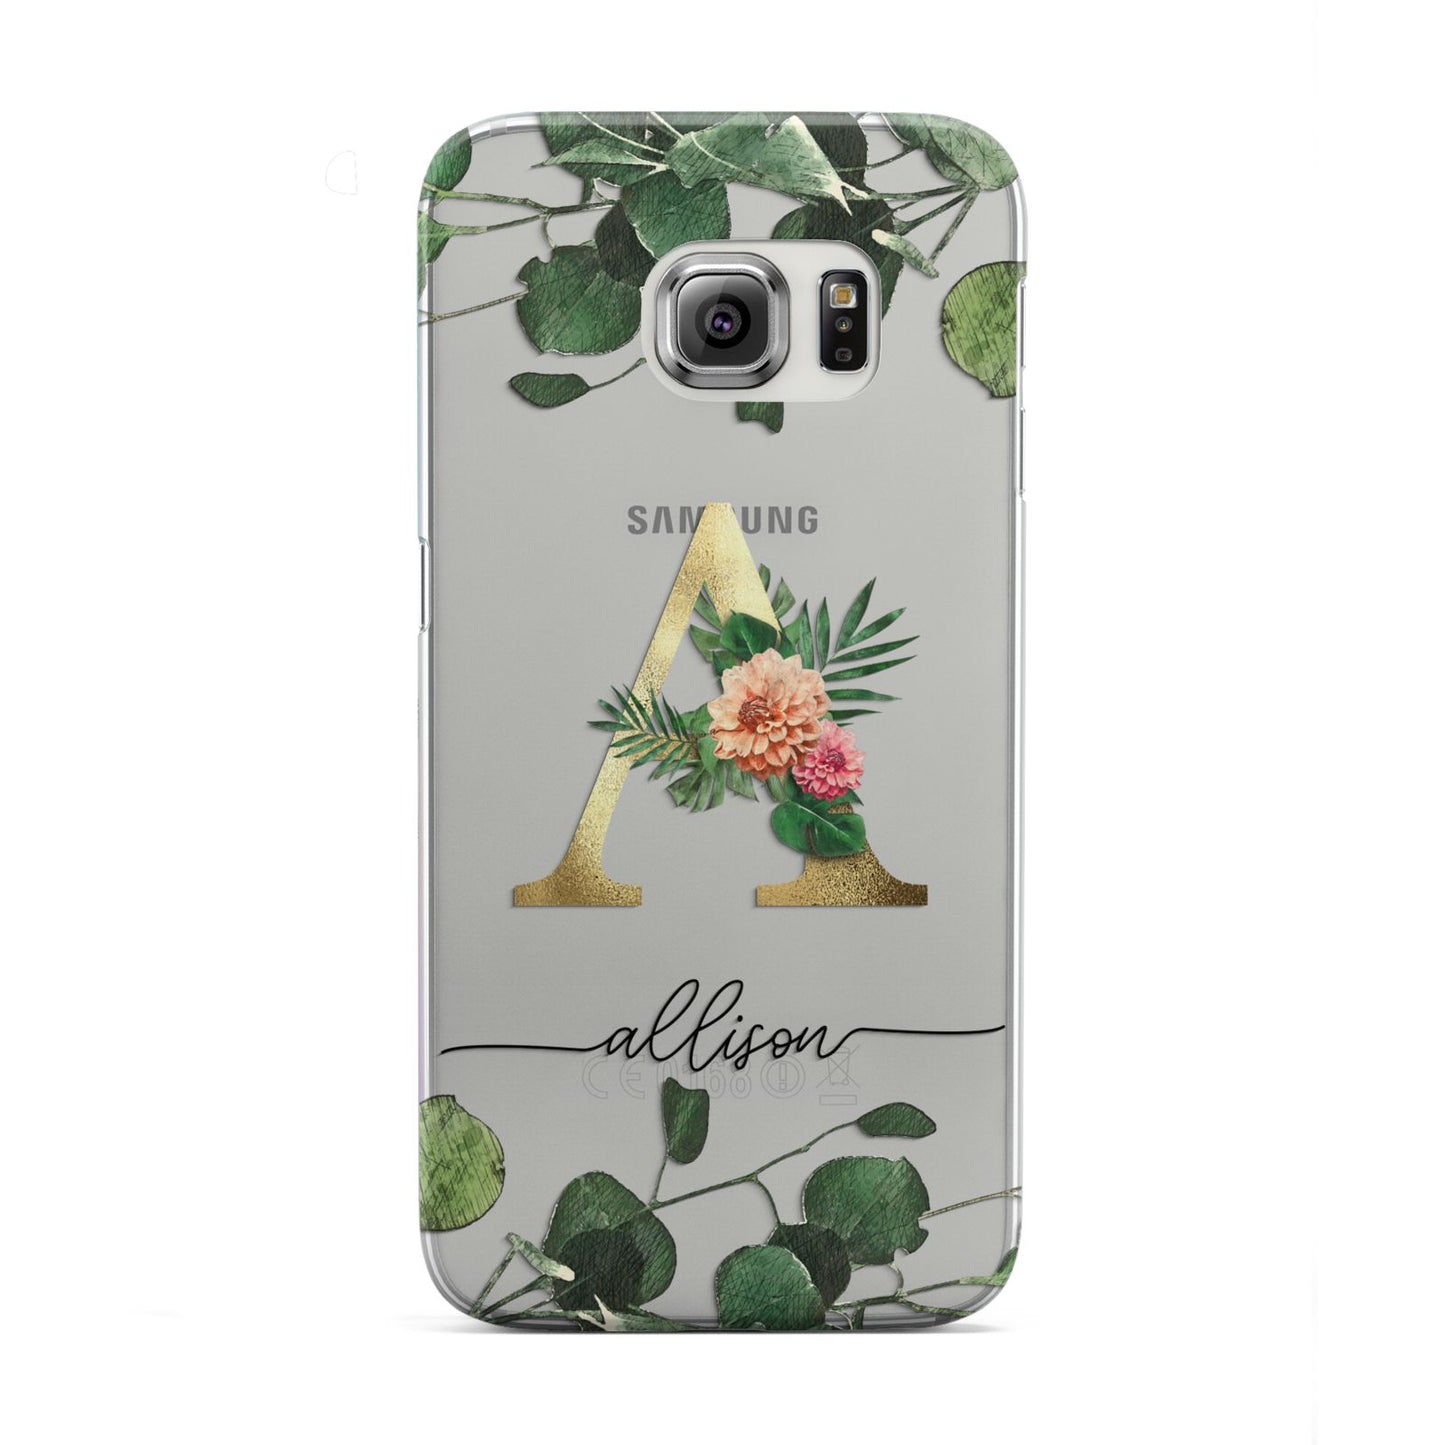 Personalised Forest Monogram Samsung Galaxy S6 Edge Case